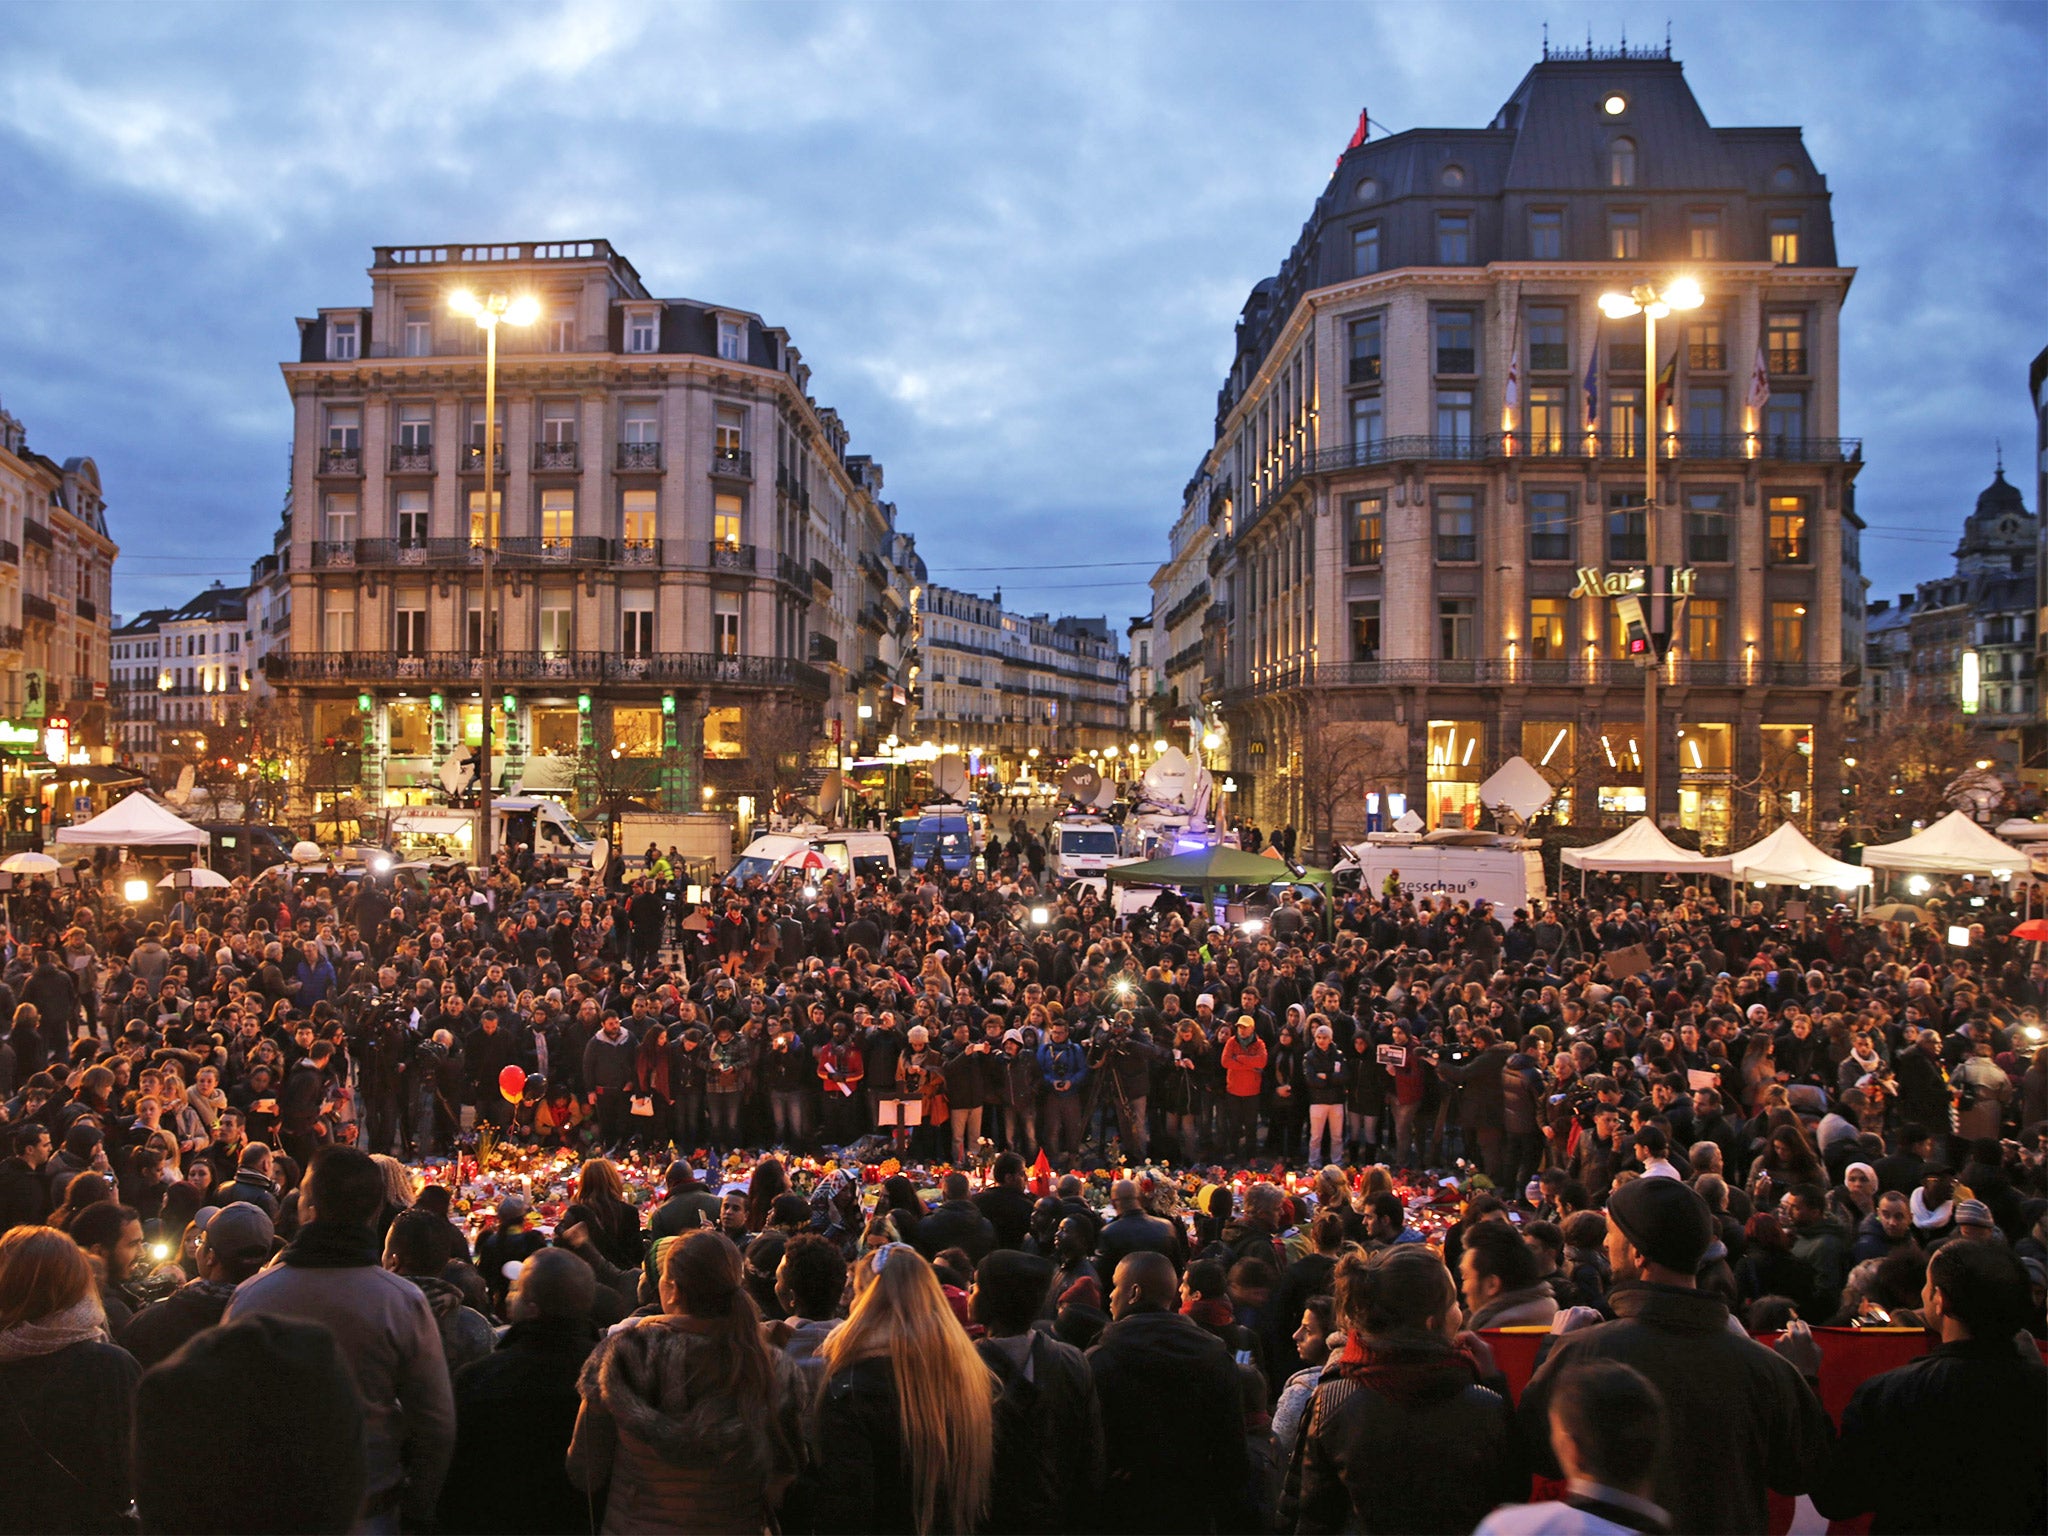 Crowds gather to pay tribute at a makeshift memorial at Place de la Bourse in Brussels